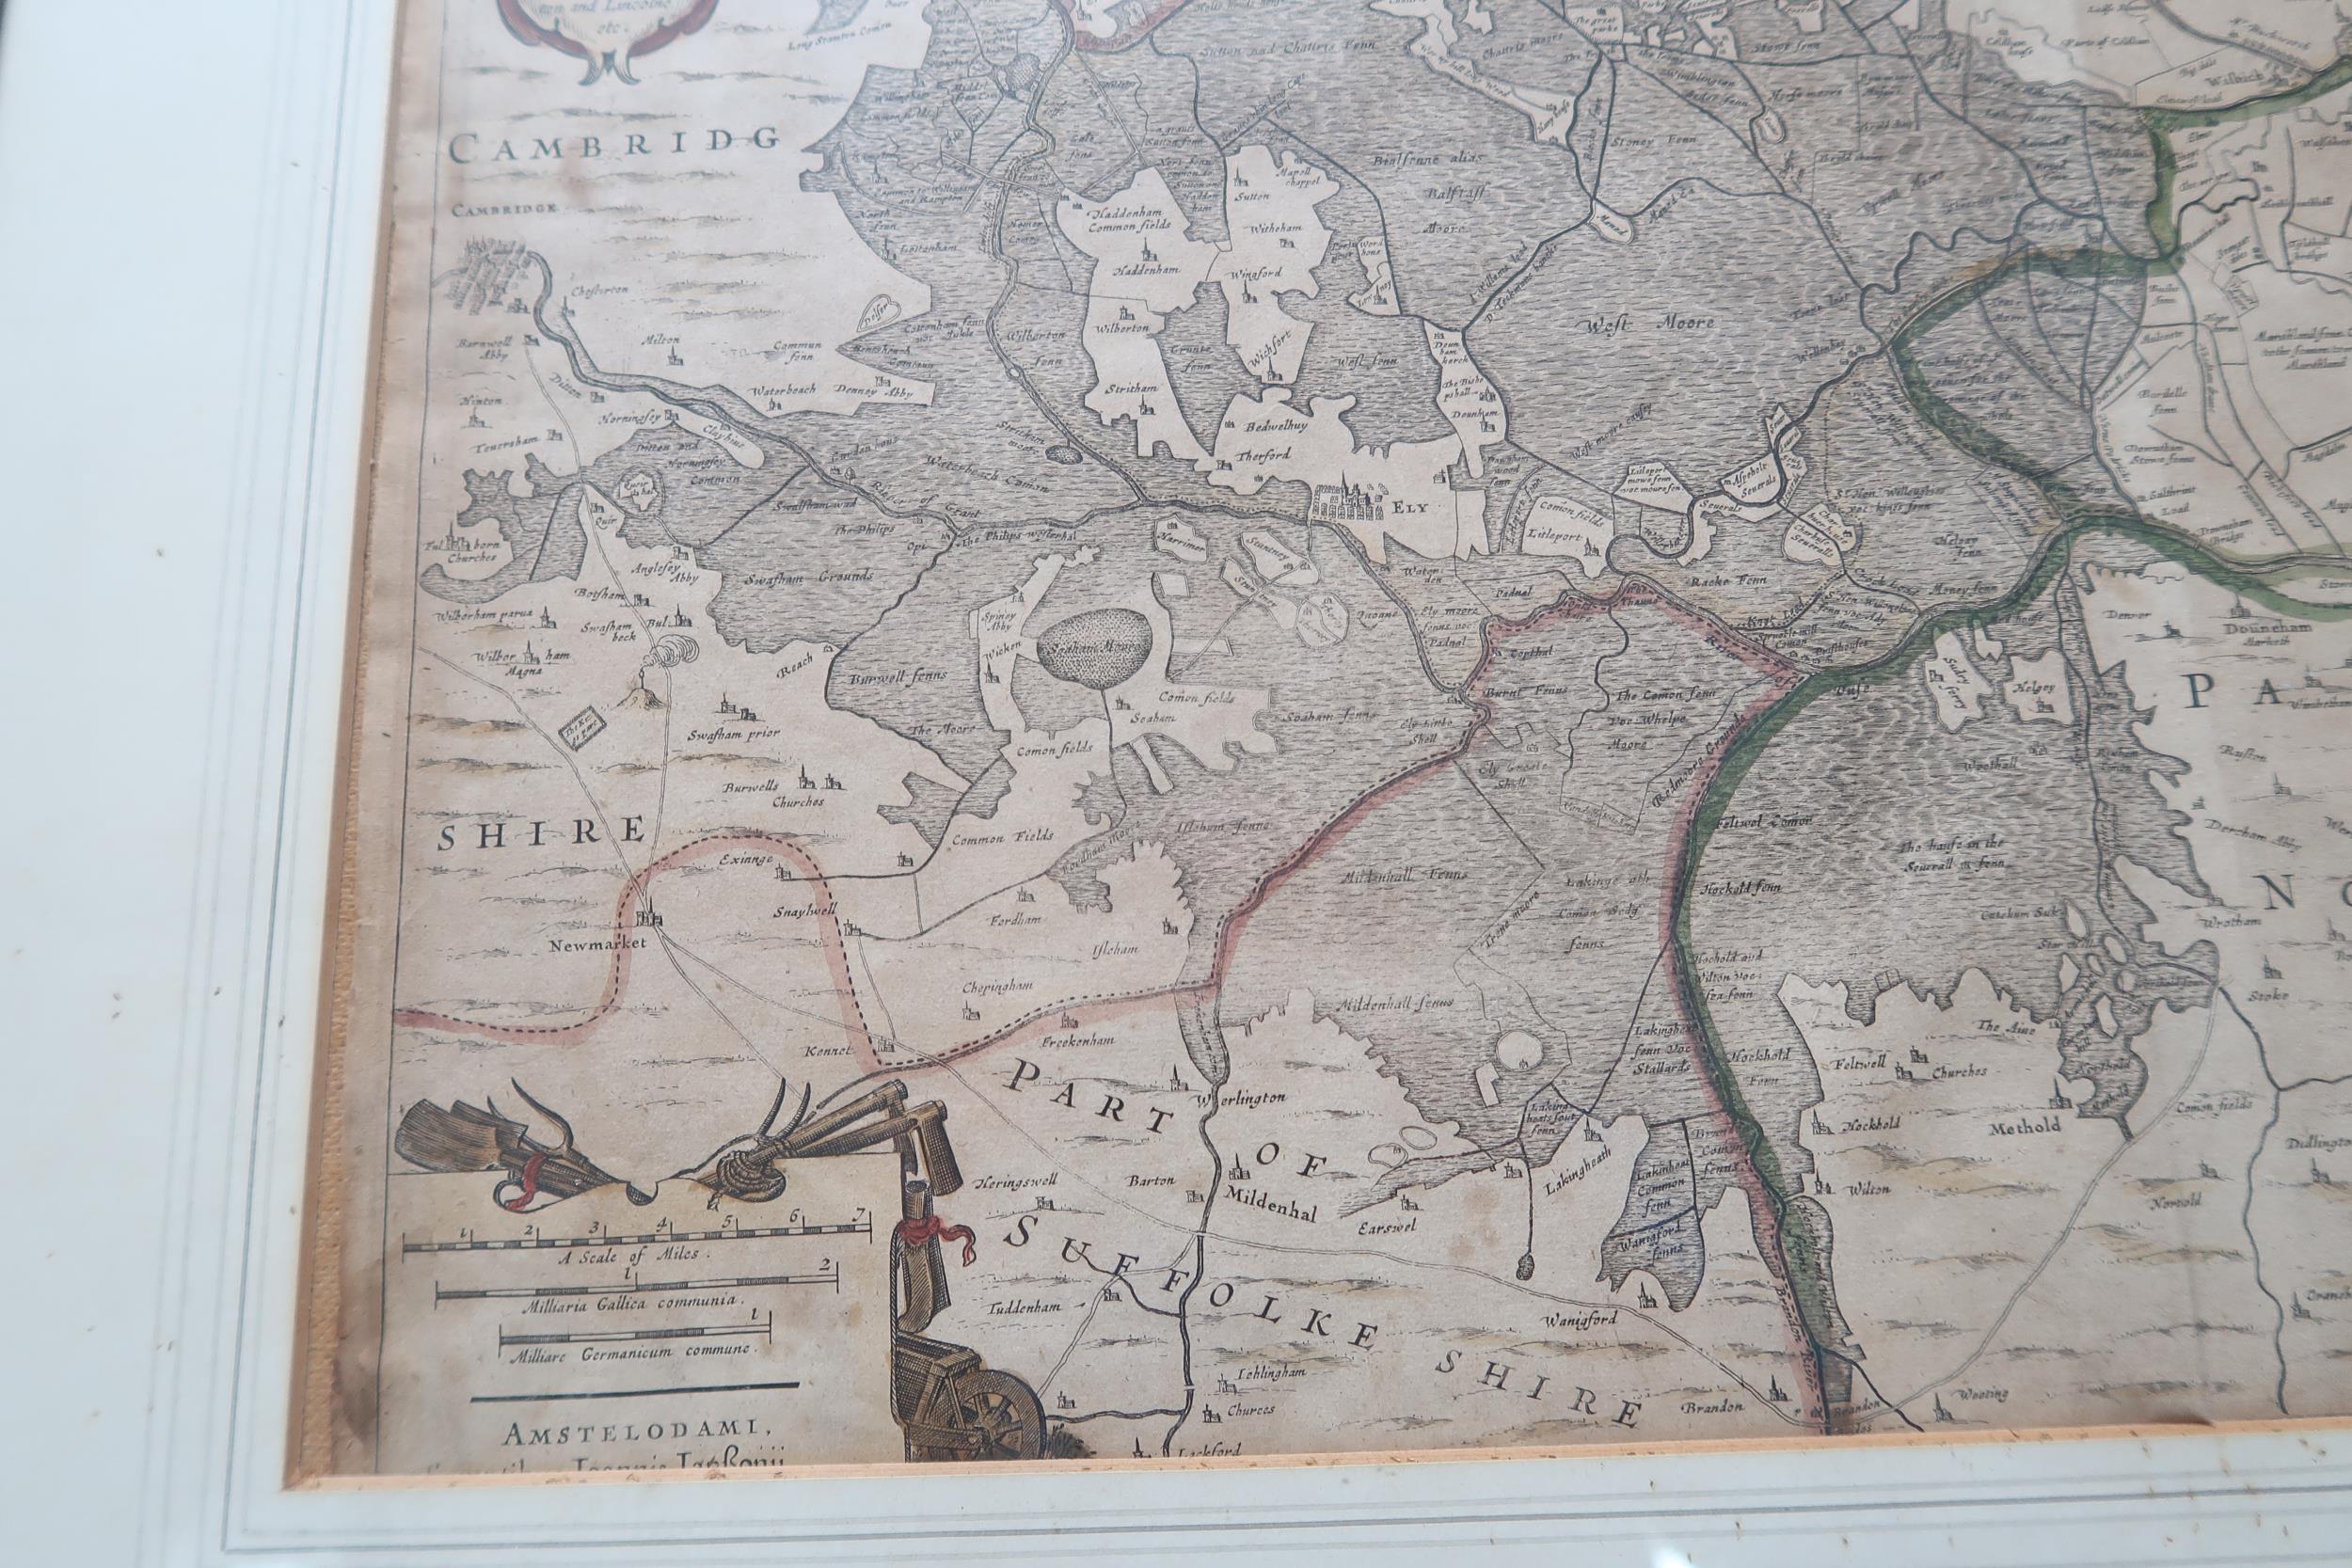 A framed map Ioannis Lansonil of Fens circa 1650 - Cambridge to the North Sea - Image 3 of 5